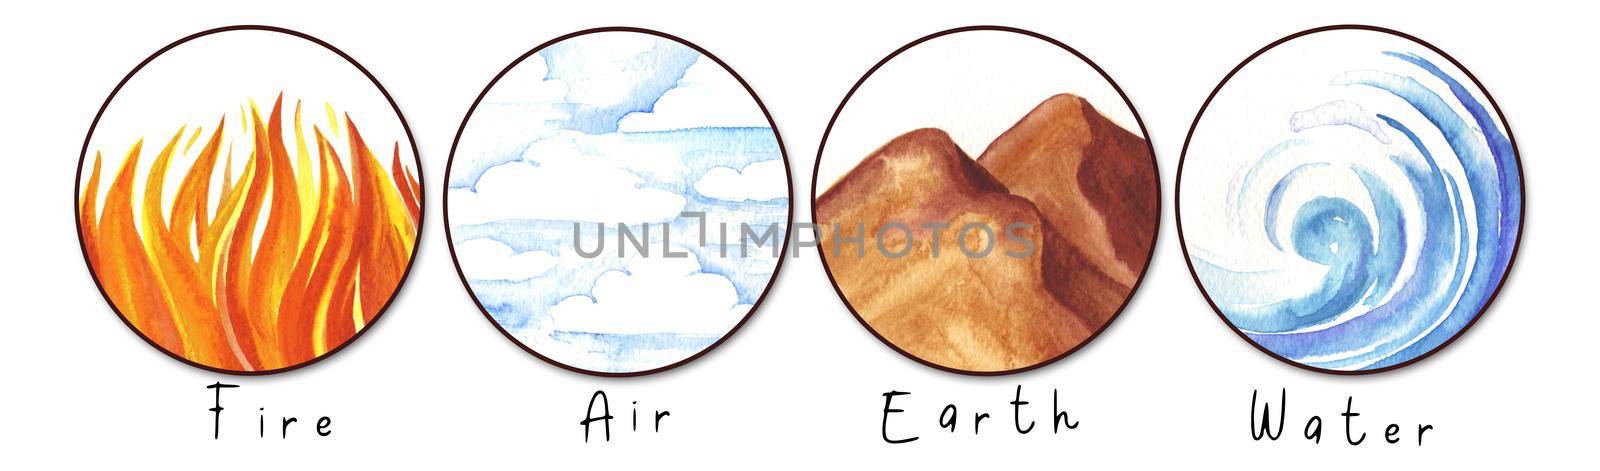 Four natural elements: fire, water, earth and air. Watercolor illustration set. by Yatsyshyna